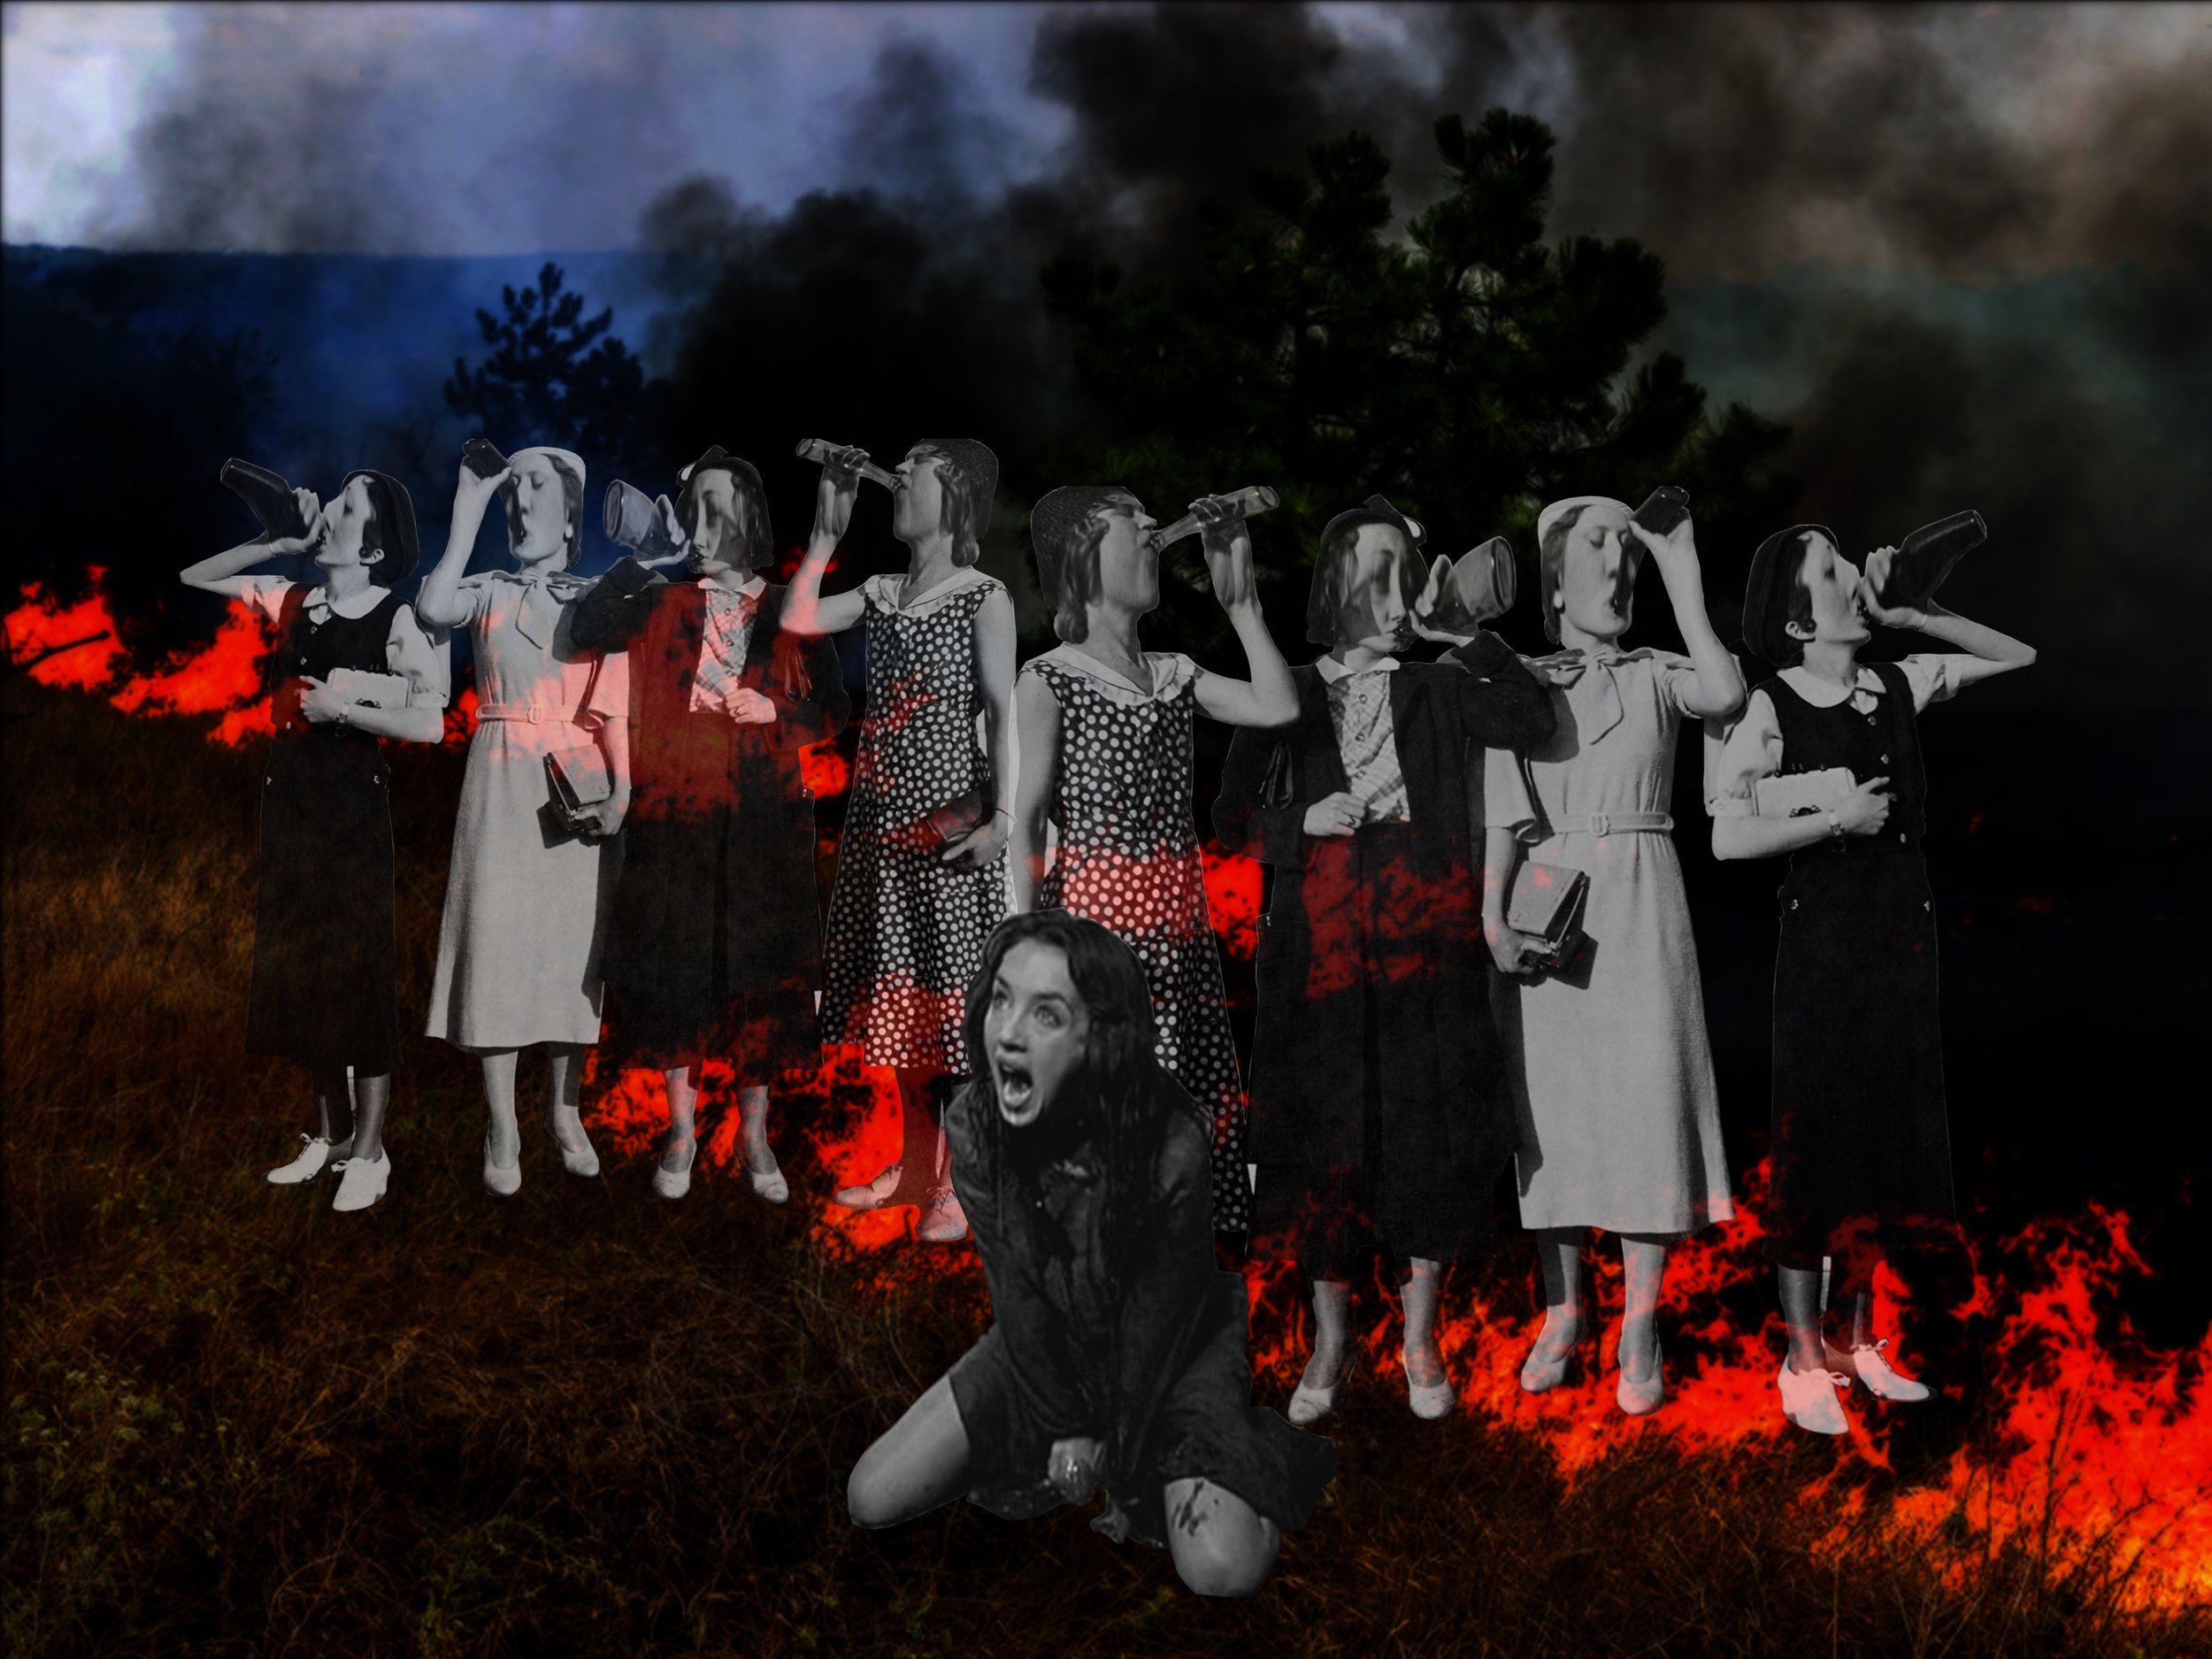 Drink While the World Burns (Isabelle Adjani) (assorted c-prints and mixed media) (2019)